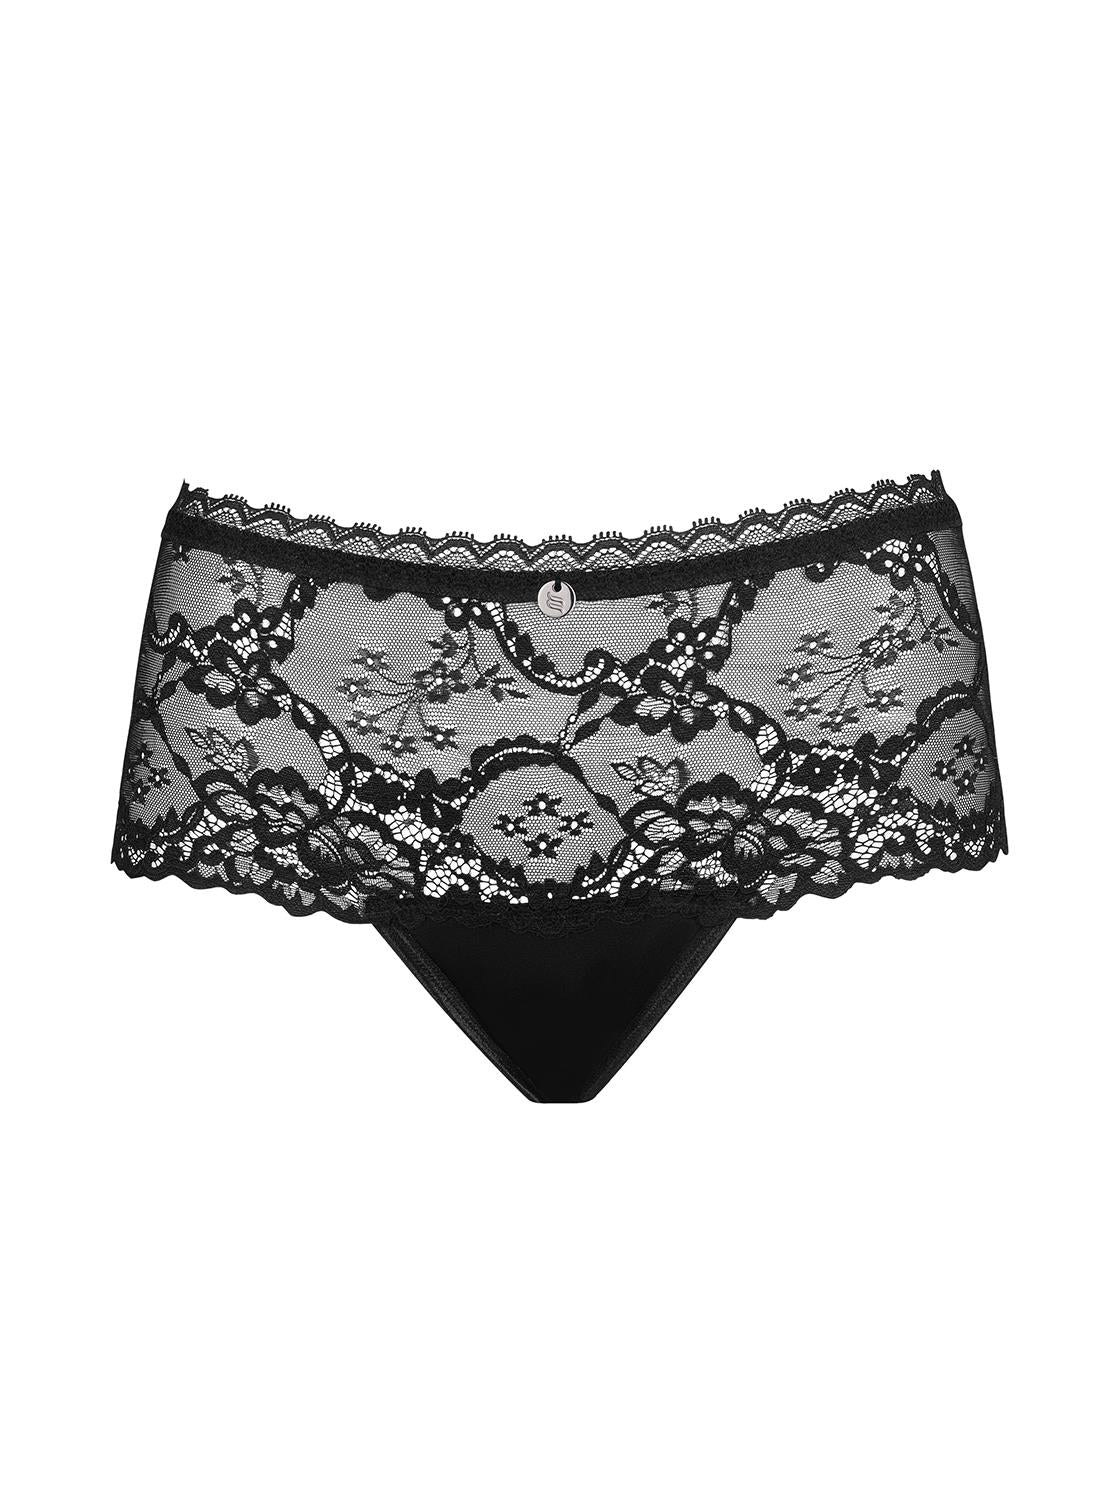 Raquelia Feminine black shorties made of translucent and elastic lace with floral pattern